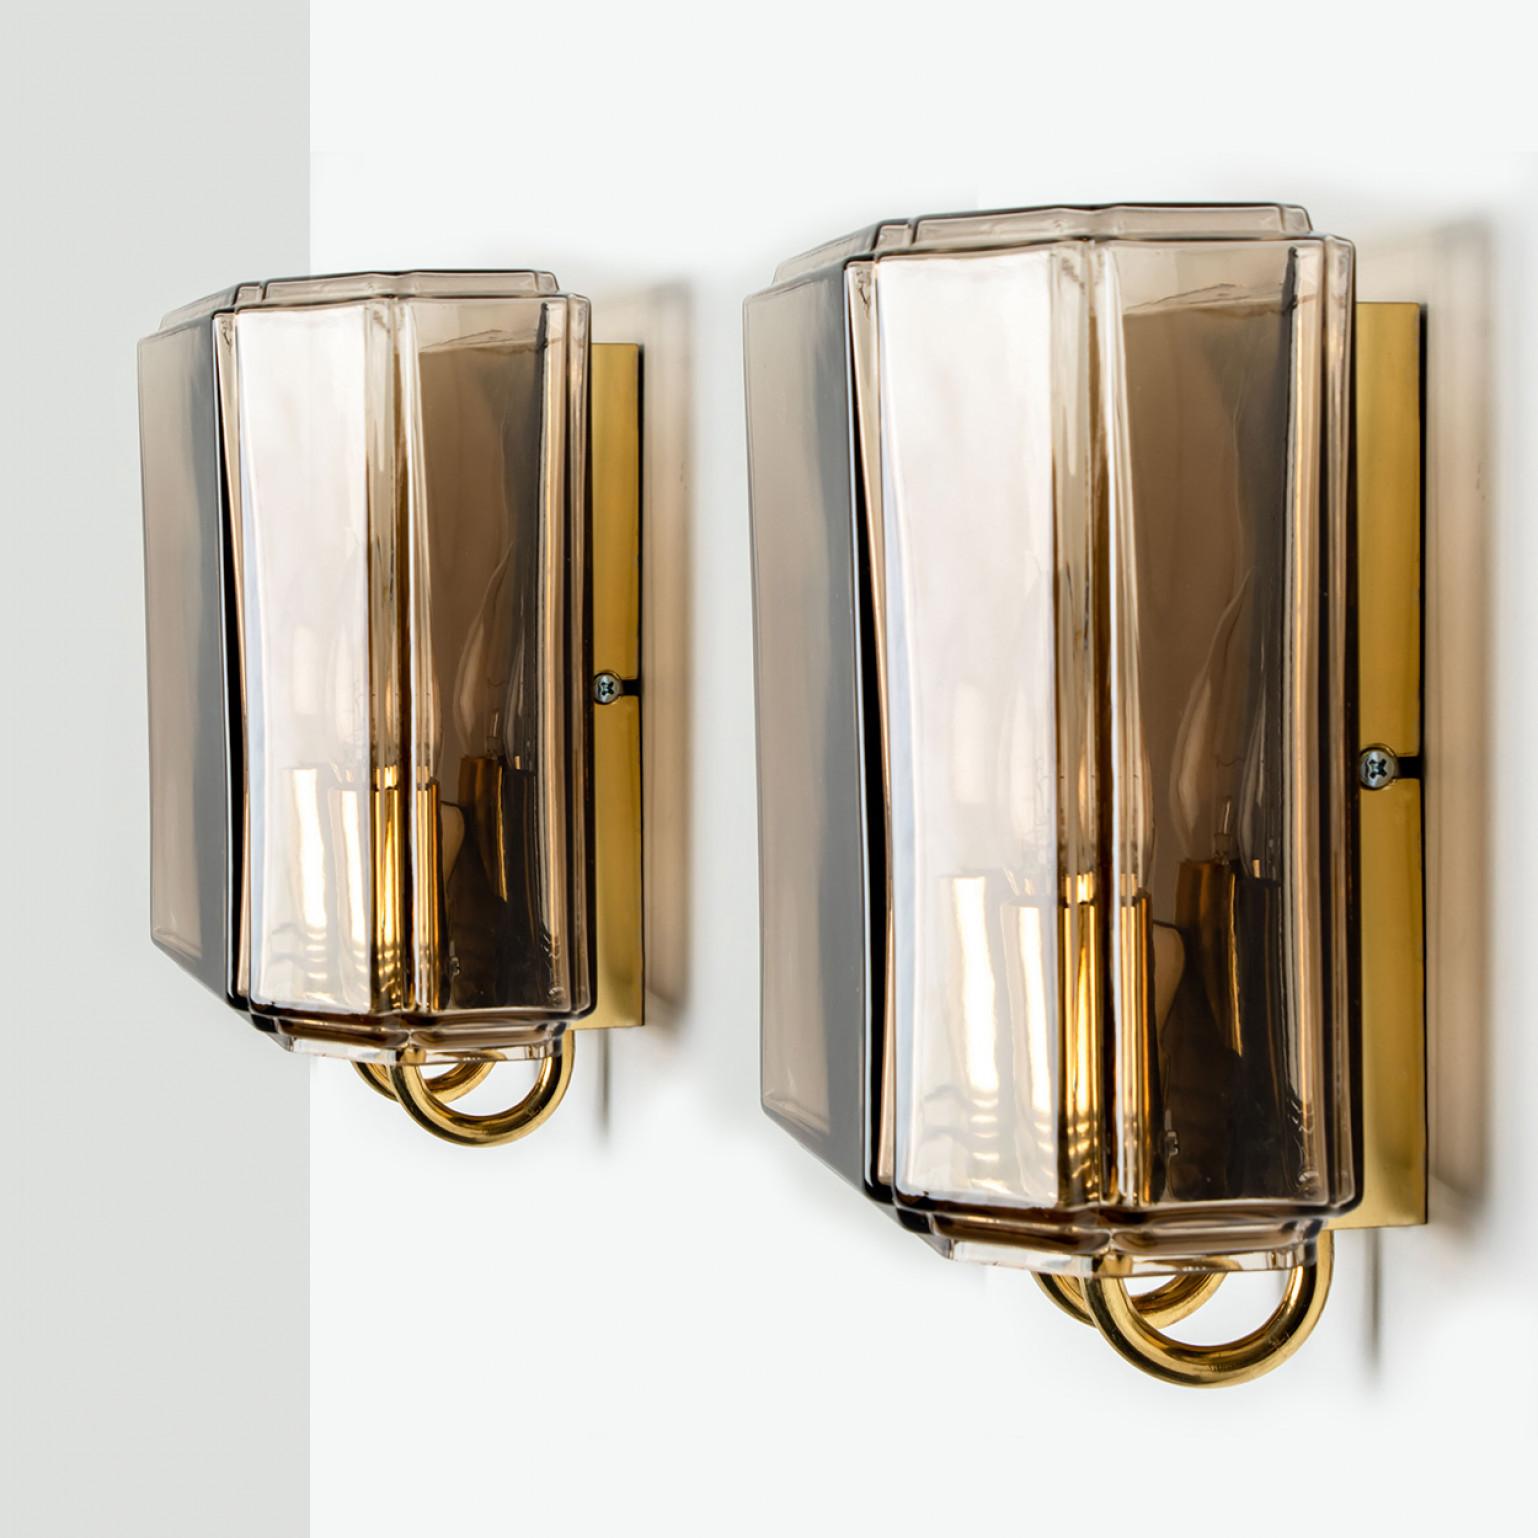 Brass One of the two Pairs of Smoked Glass Wall Lights Sconces by Glashütte Limburg, 1 For Sale